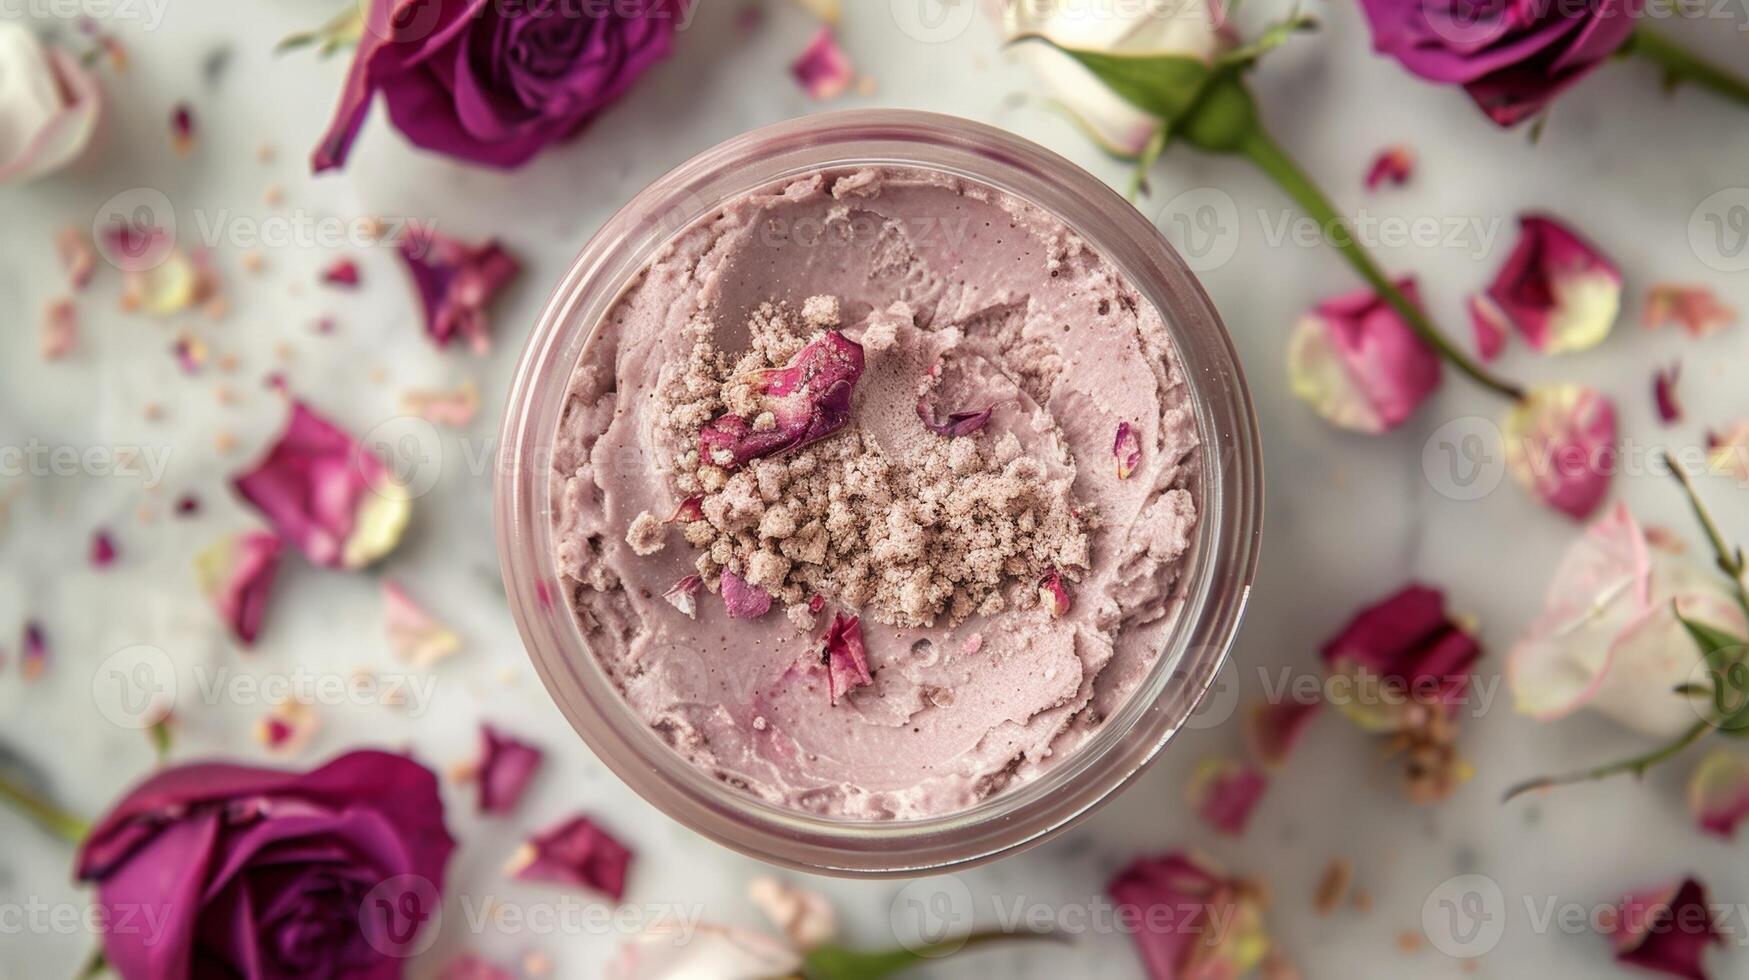 A jar of rejuvenating facial mask made with crushed rose petals French clay and organic aloe vera is a staple in any luxurious selfcare routine photo